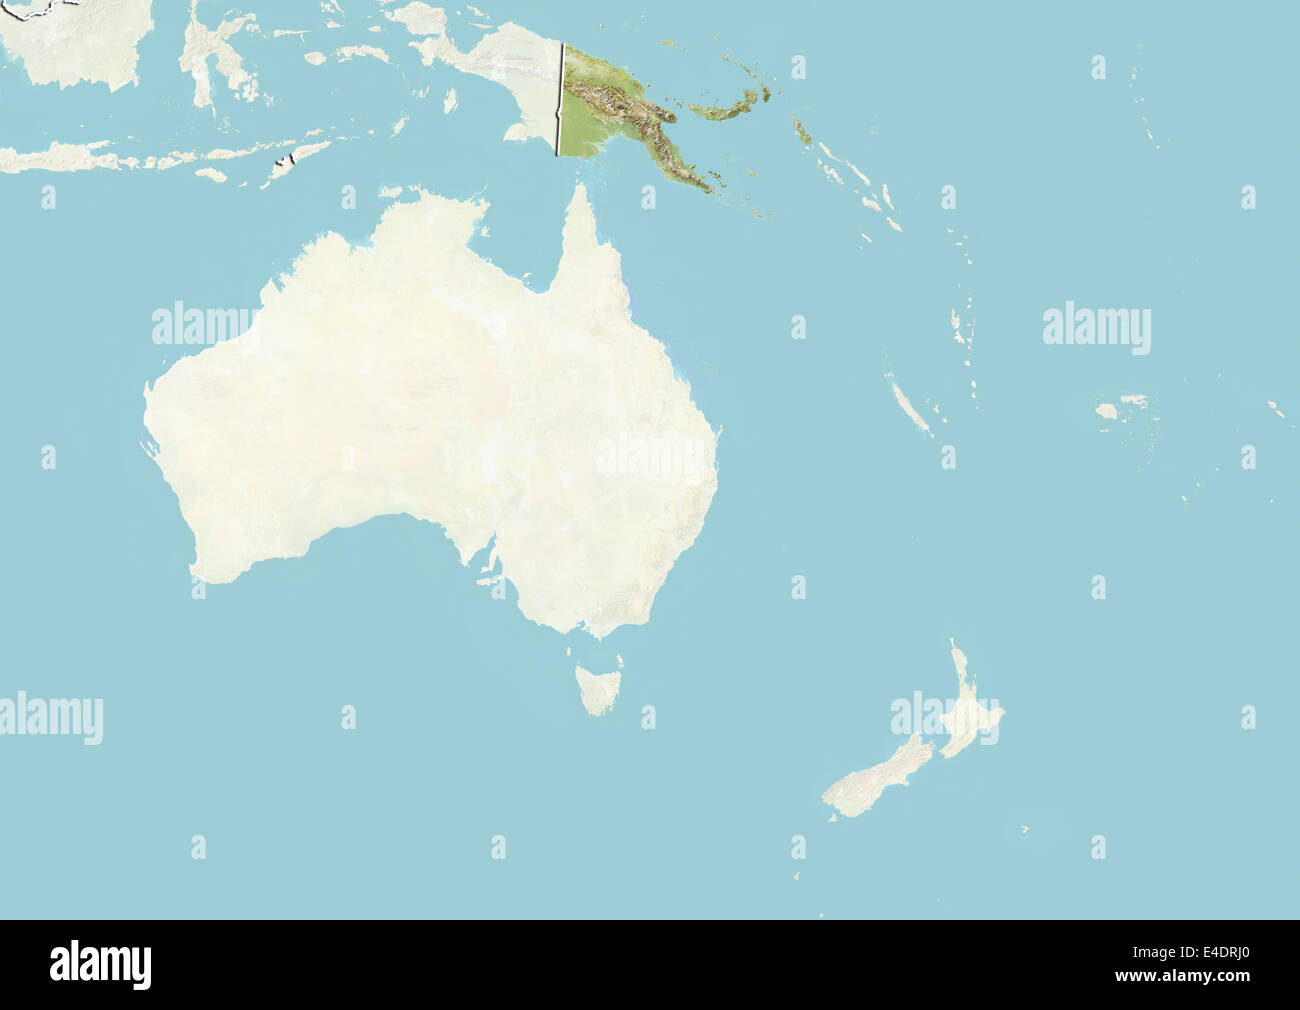 Papua New Guinea, Relief Map Stock Photo